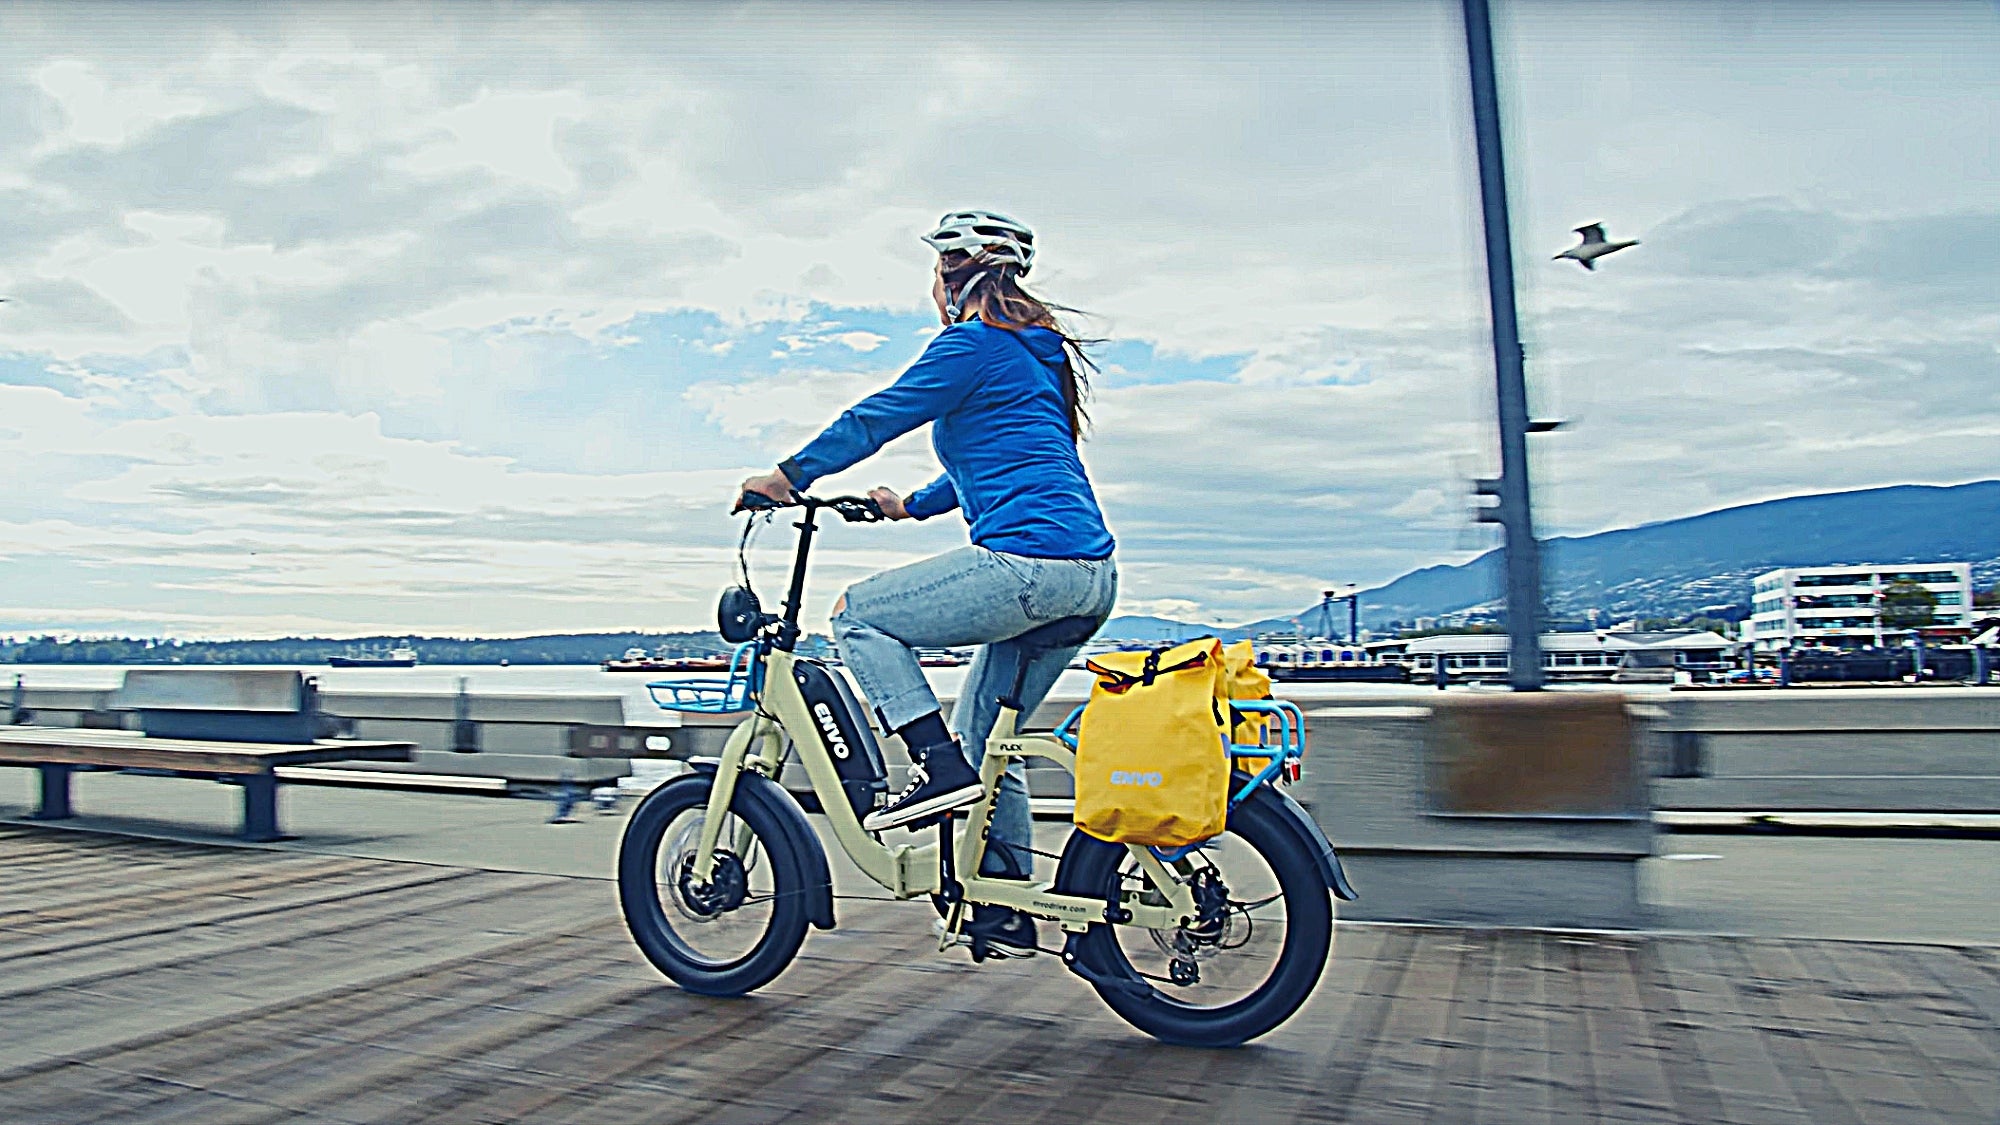 In Canadian provinces, most electric bikes motors are limited to 500W and cannot travel faster than 32 km/h (20 mph)